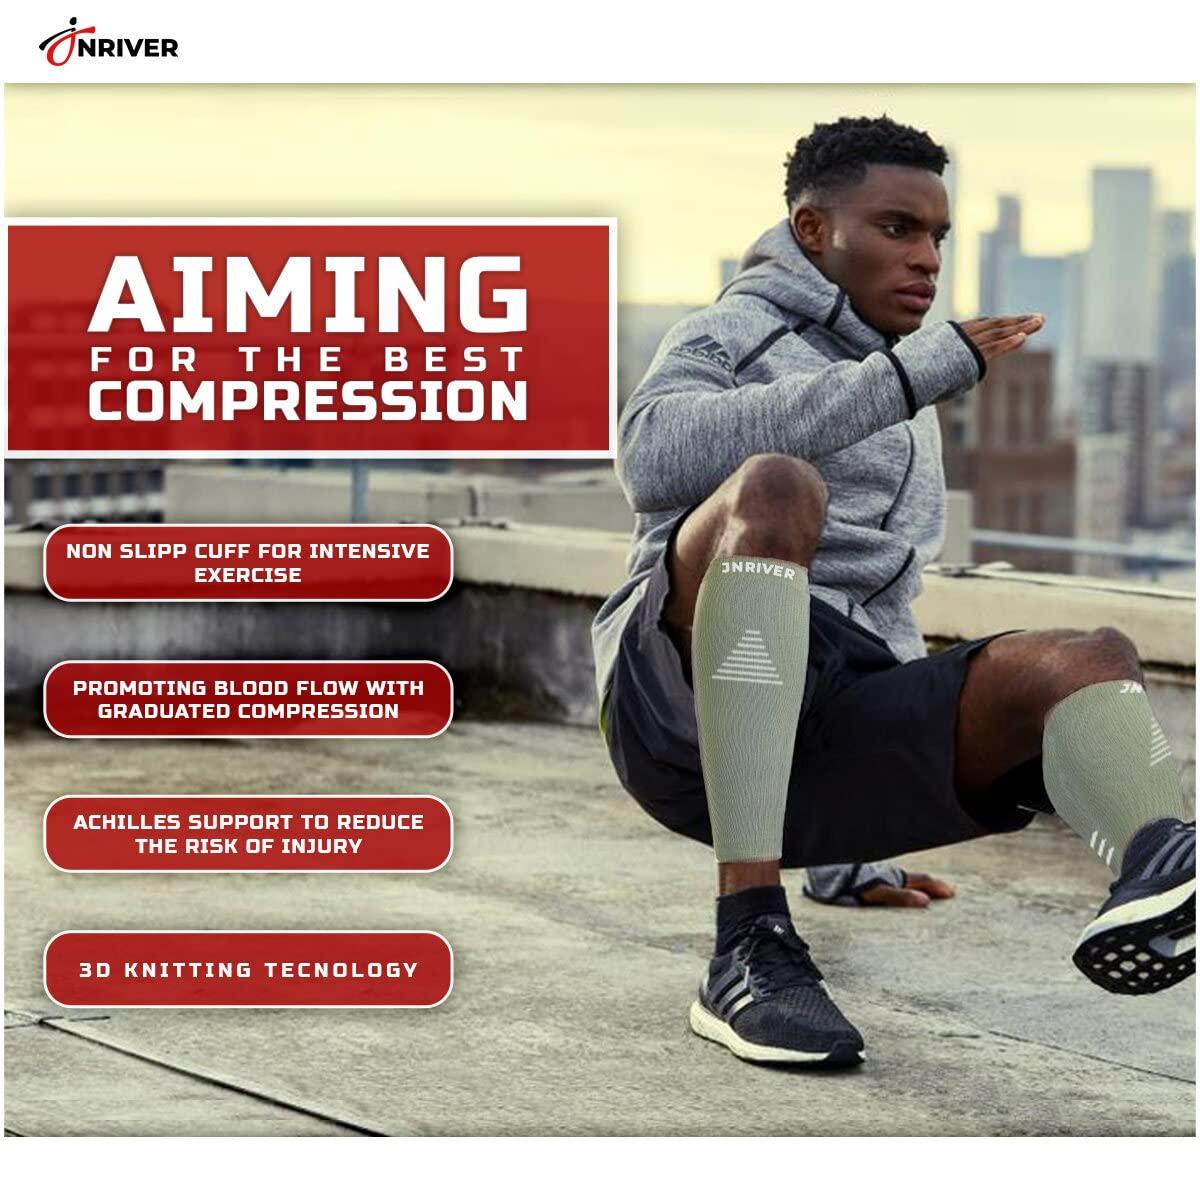  Maternity Compression Socks Calf Sleeve Women Athletic Sleeve  Women Leg Sleeves For Men Football Muscle Recovery Varicose Veins Treatment  For Legs Shin Splints Leg Pain Relief Support Grey XXL